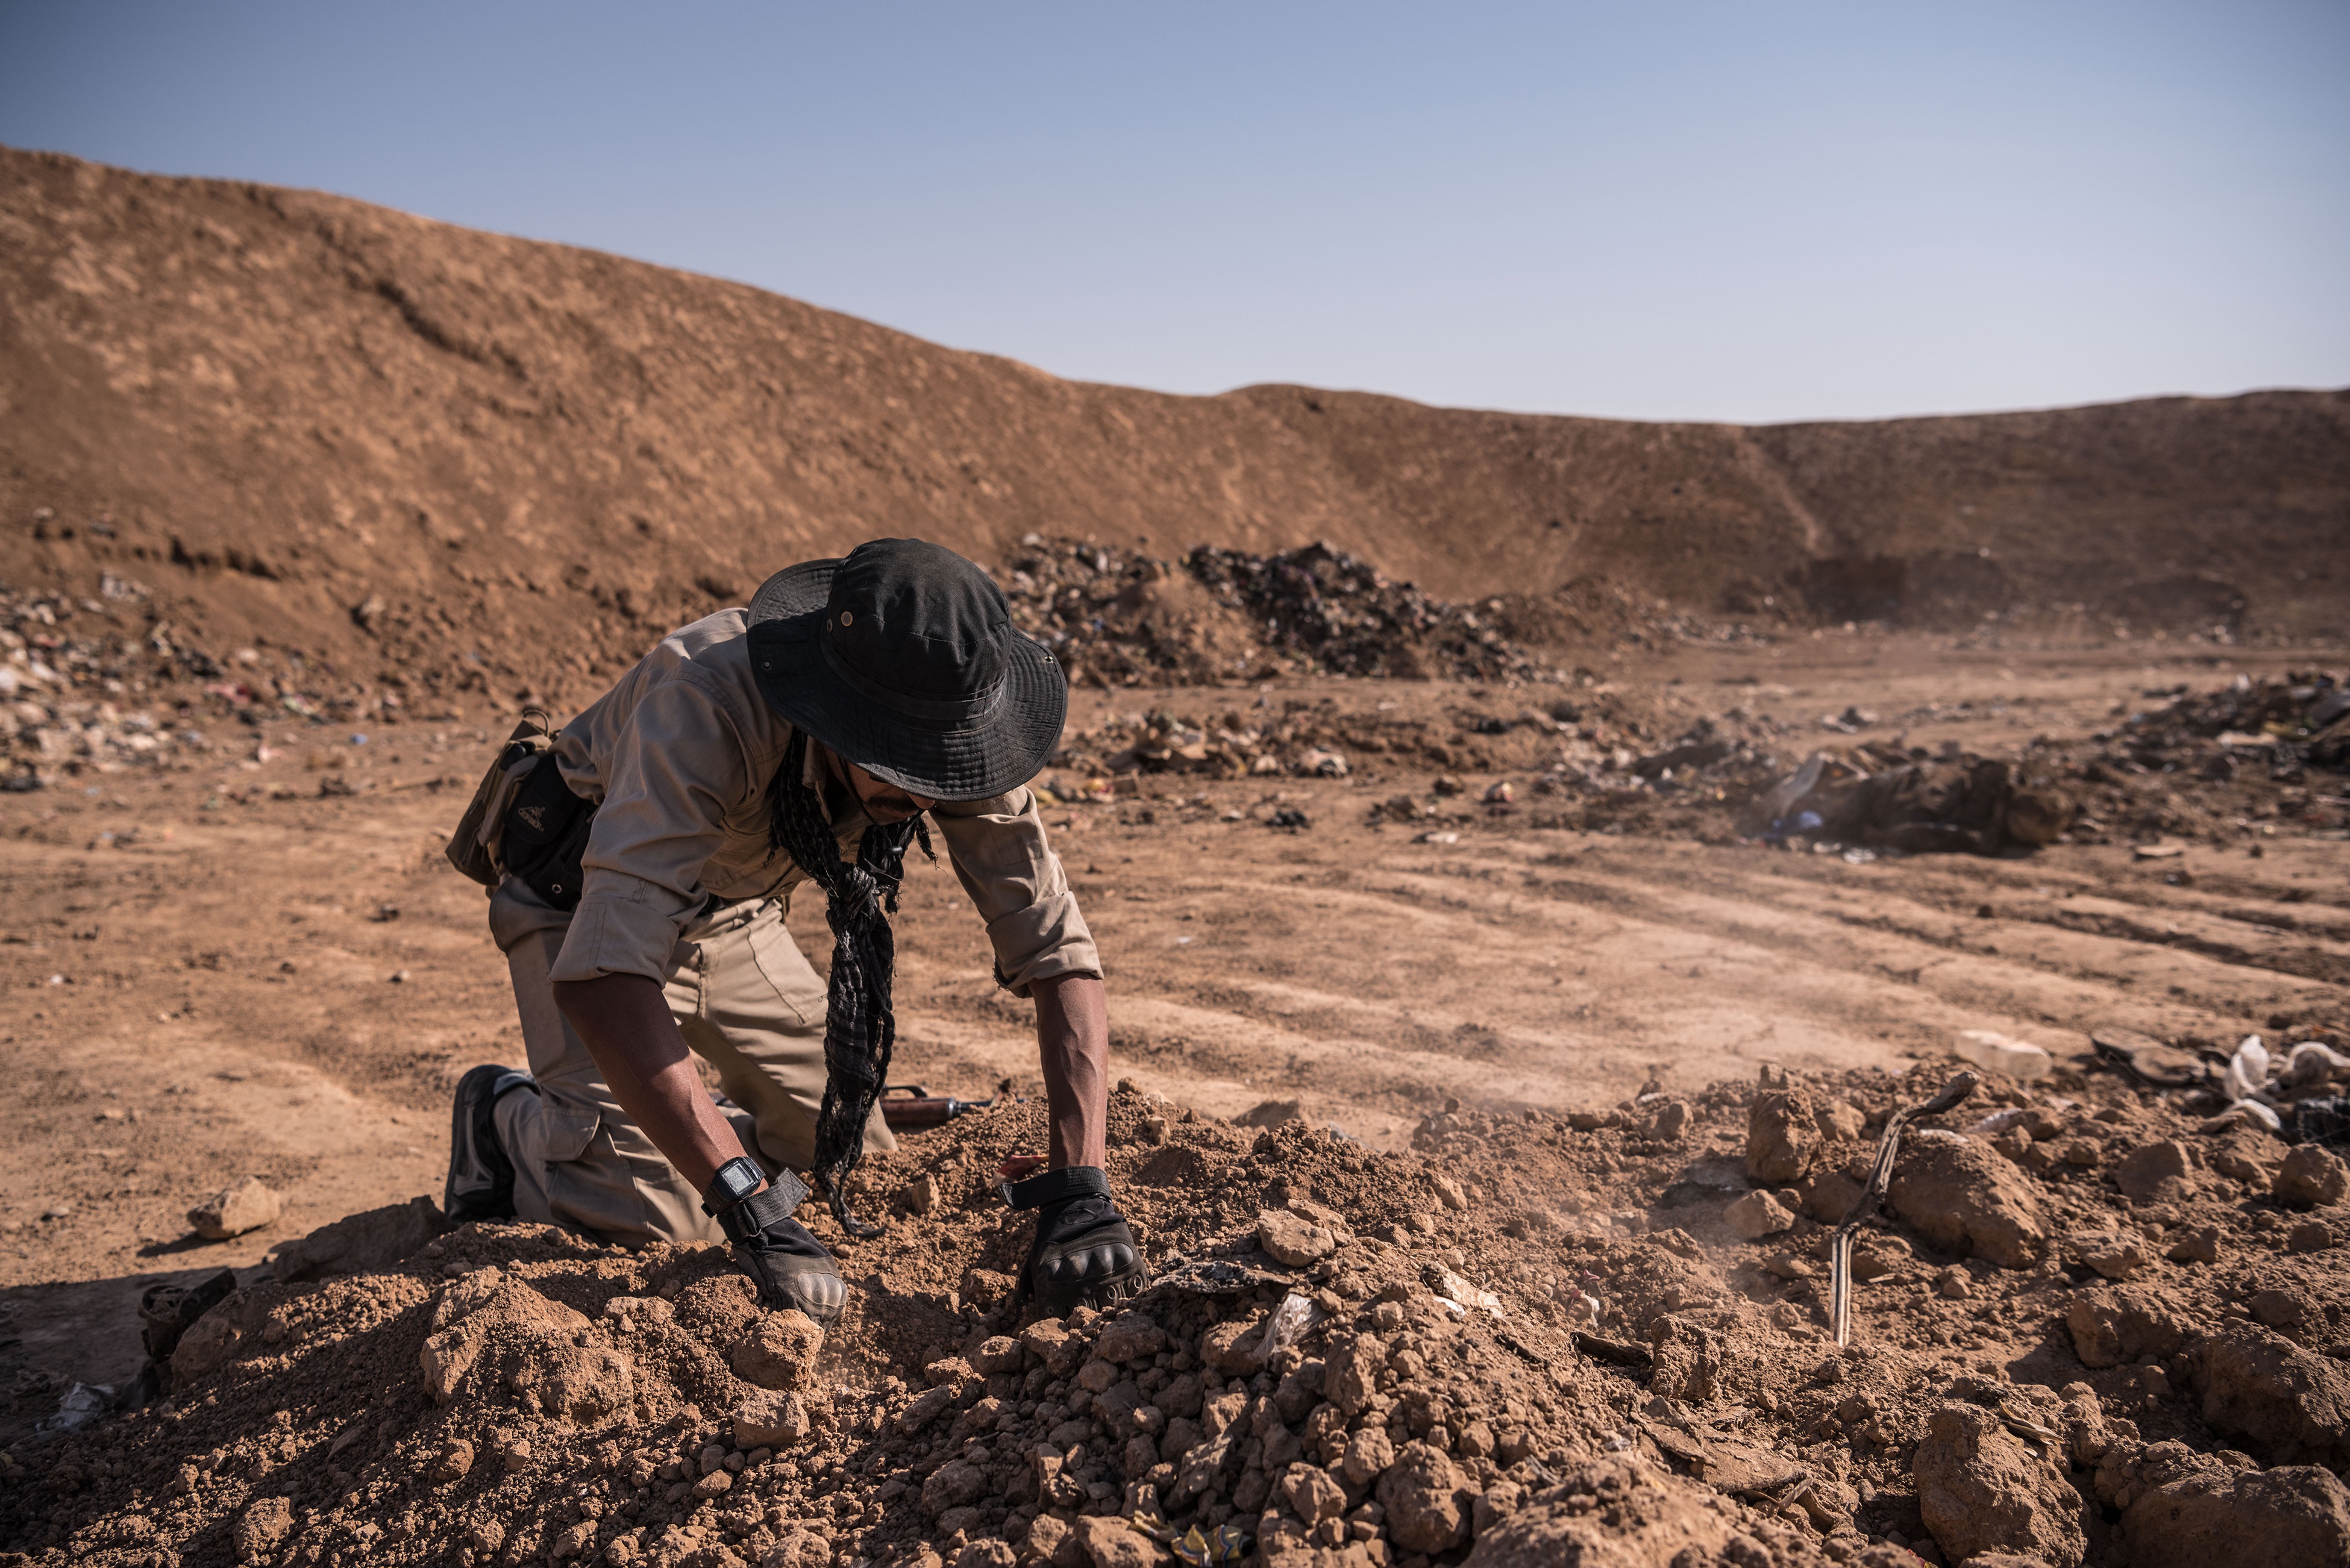 An Iraqi army soldier searches for remains at the mass grave that was discovered at a trash dump site on the outskirts of Hammam Al-Alil after it was liberated by Iraqi forces, in Iraq.